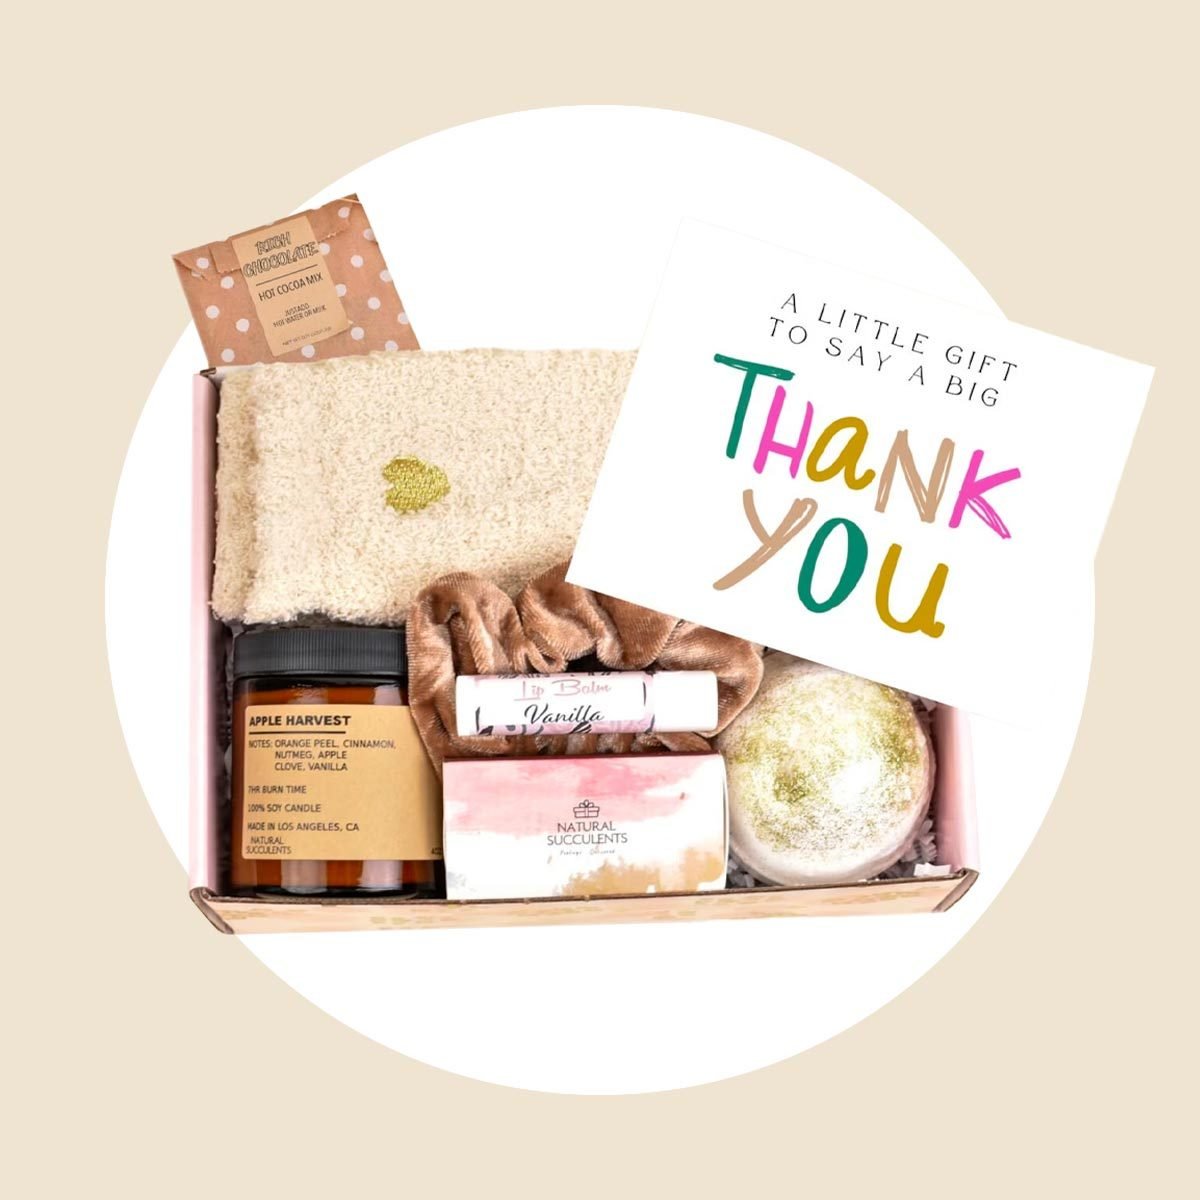 The 40 Best Thank-You Gifts for Friends & Family